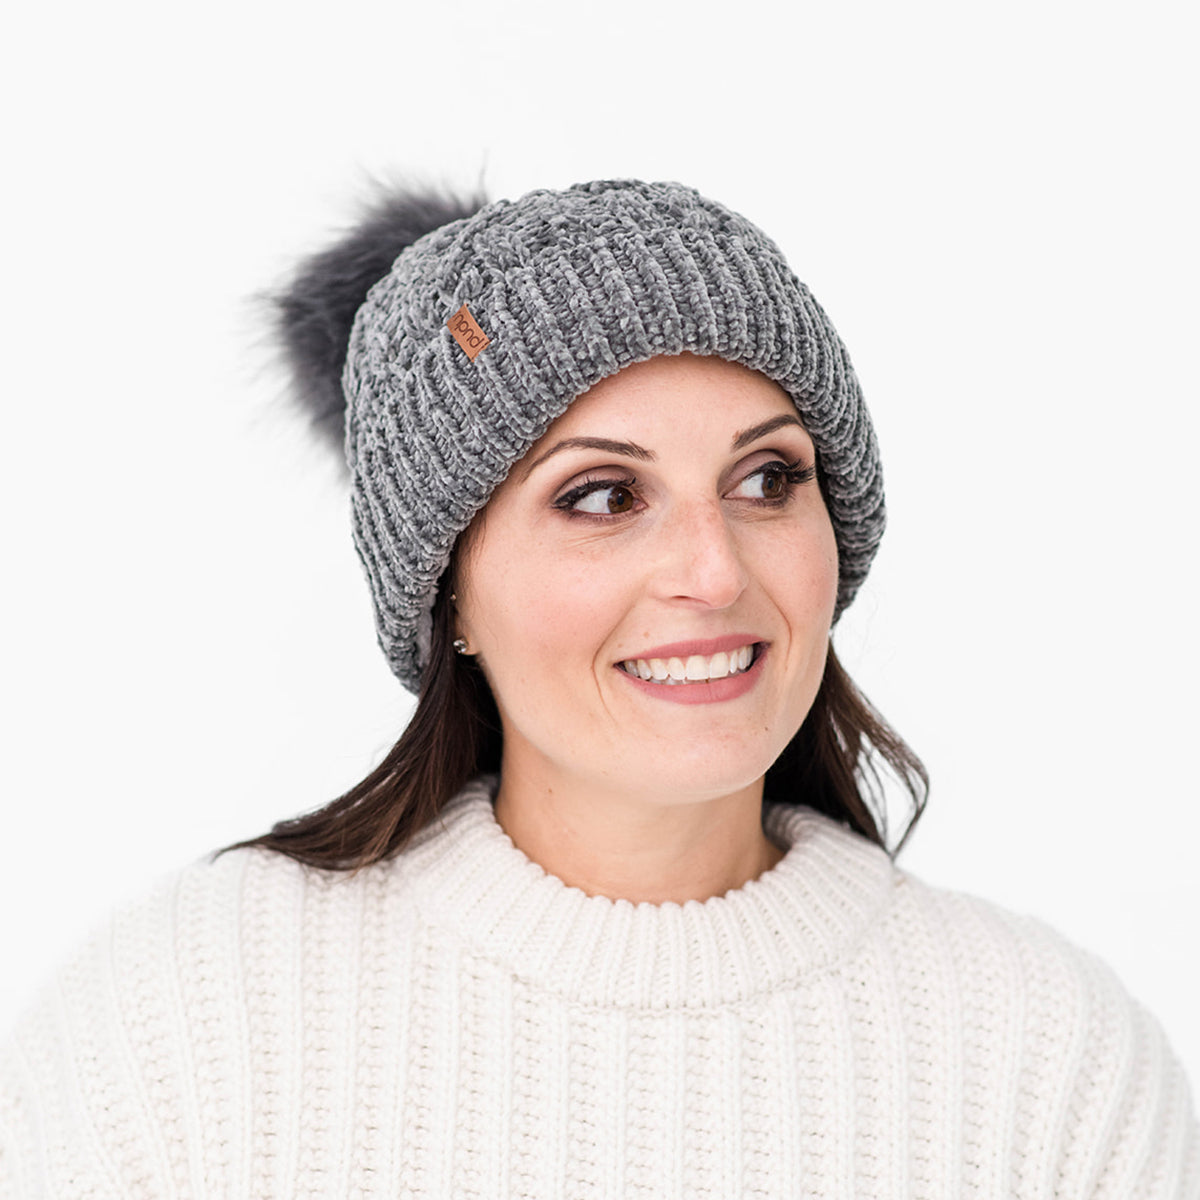 Recycled Beanie Hat - Chenille Knit Charcoal